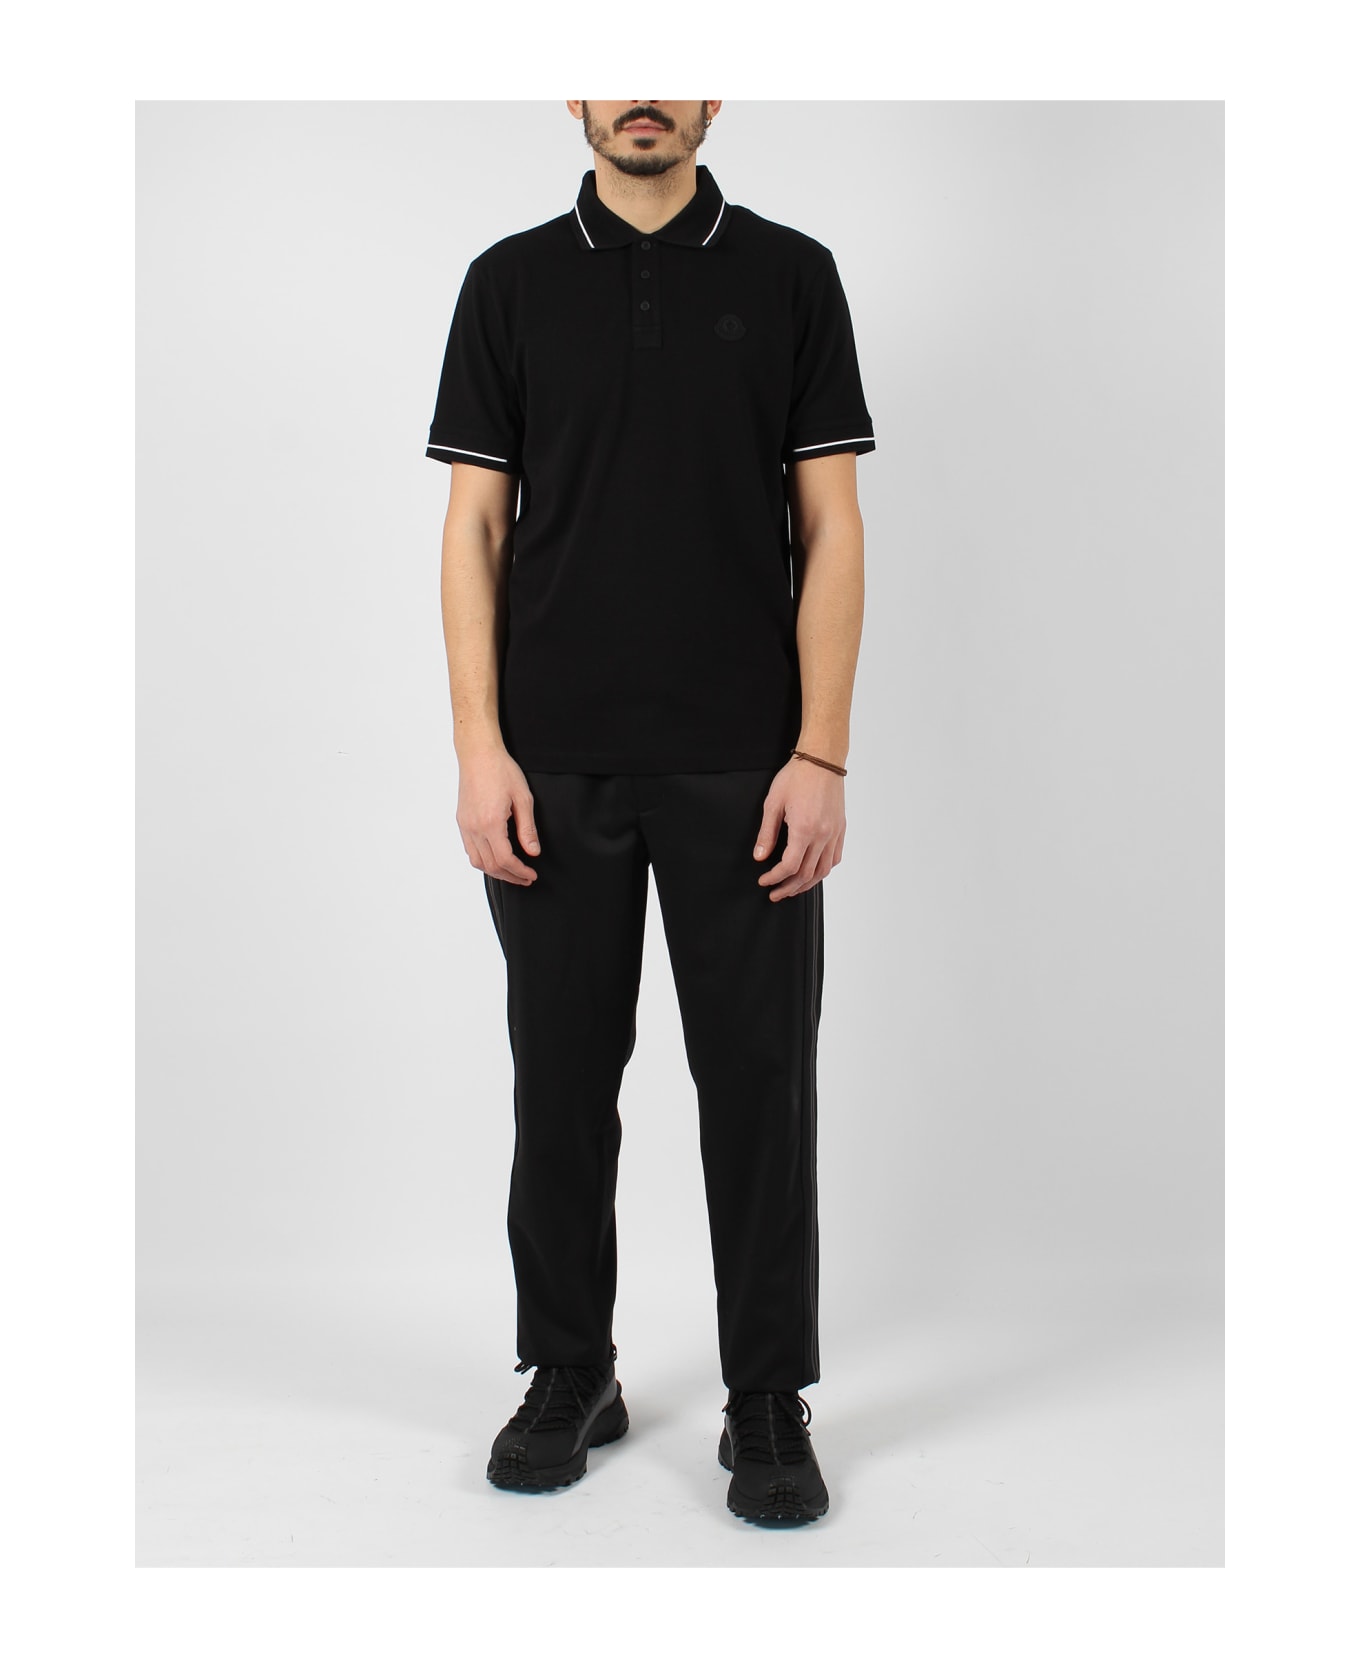 Moncler Black Short-sleeved Polo With Embroidered Logo - Black